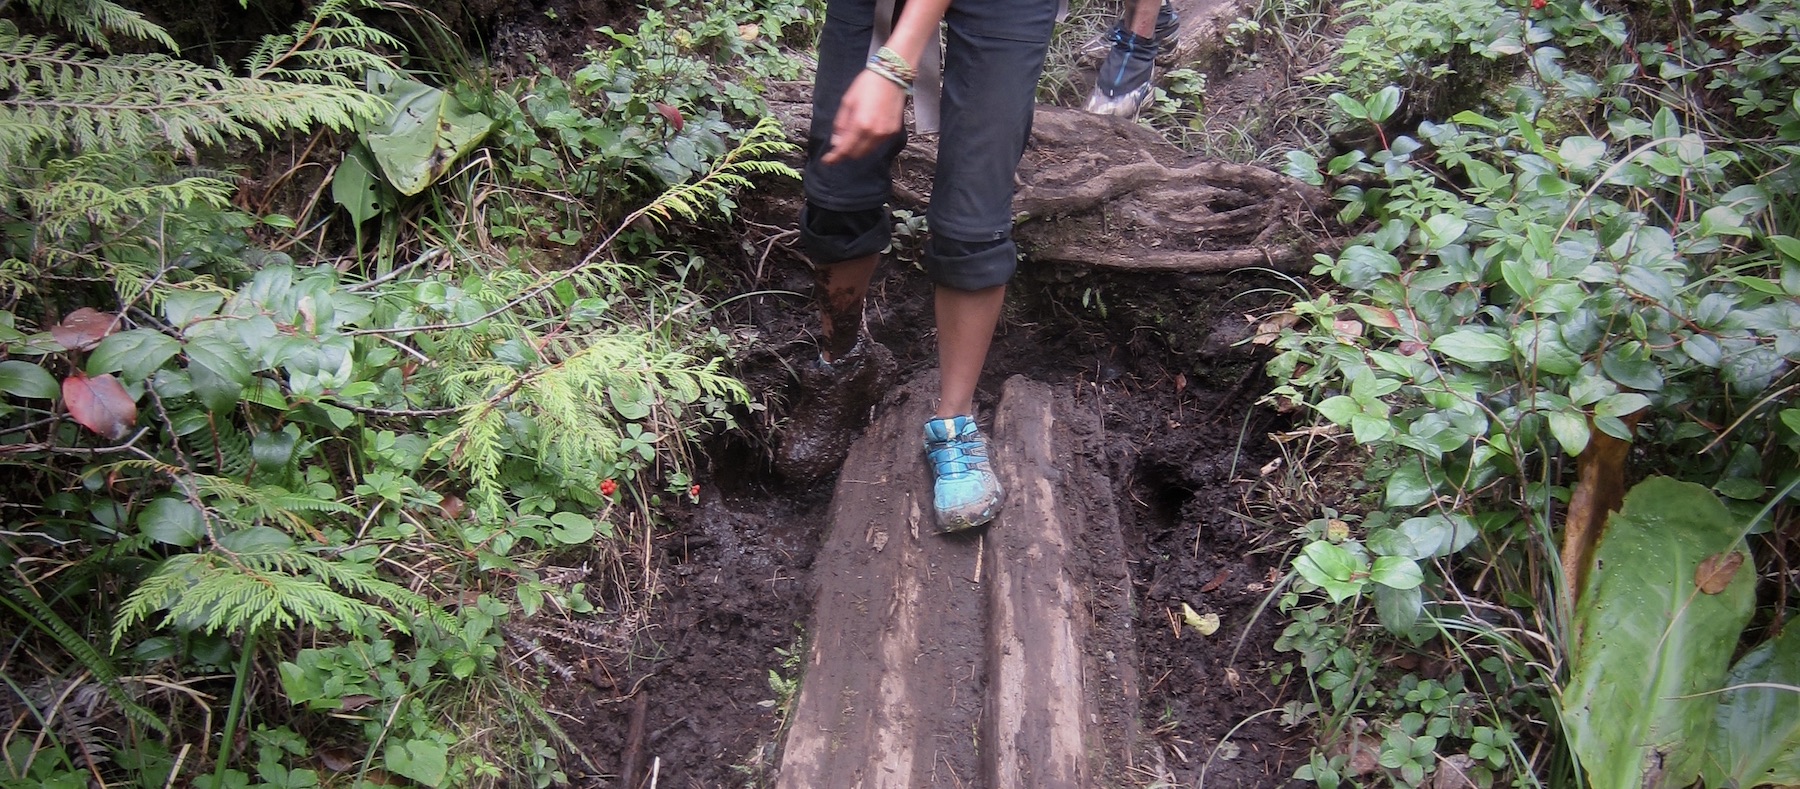 There were warnings about shin-high mud, but we didn't have it much worse than this D: